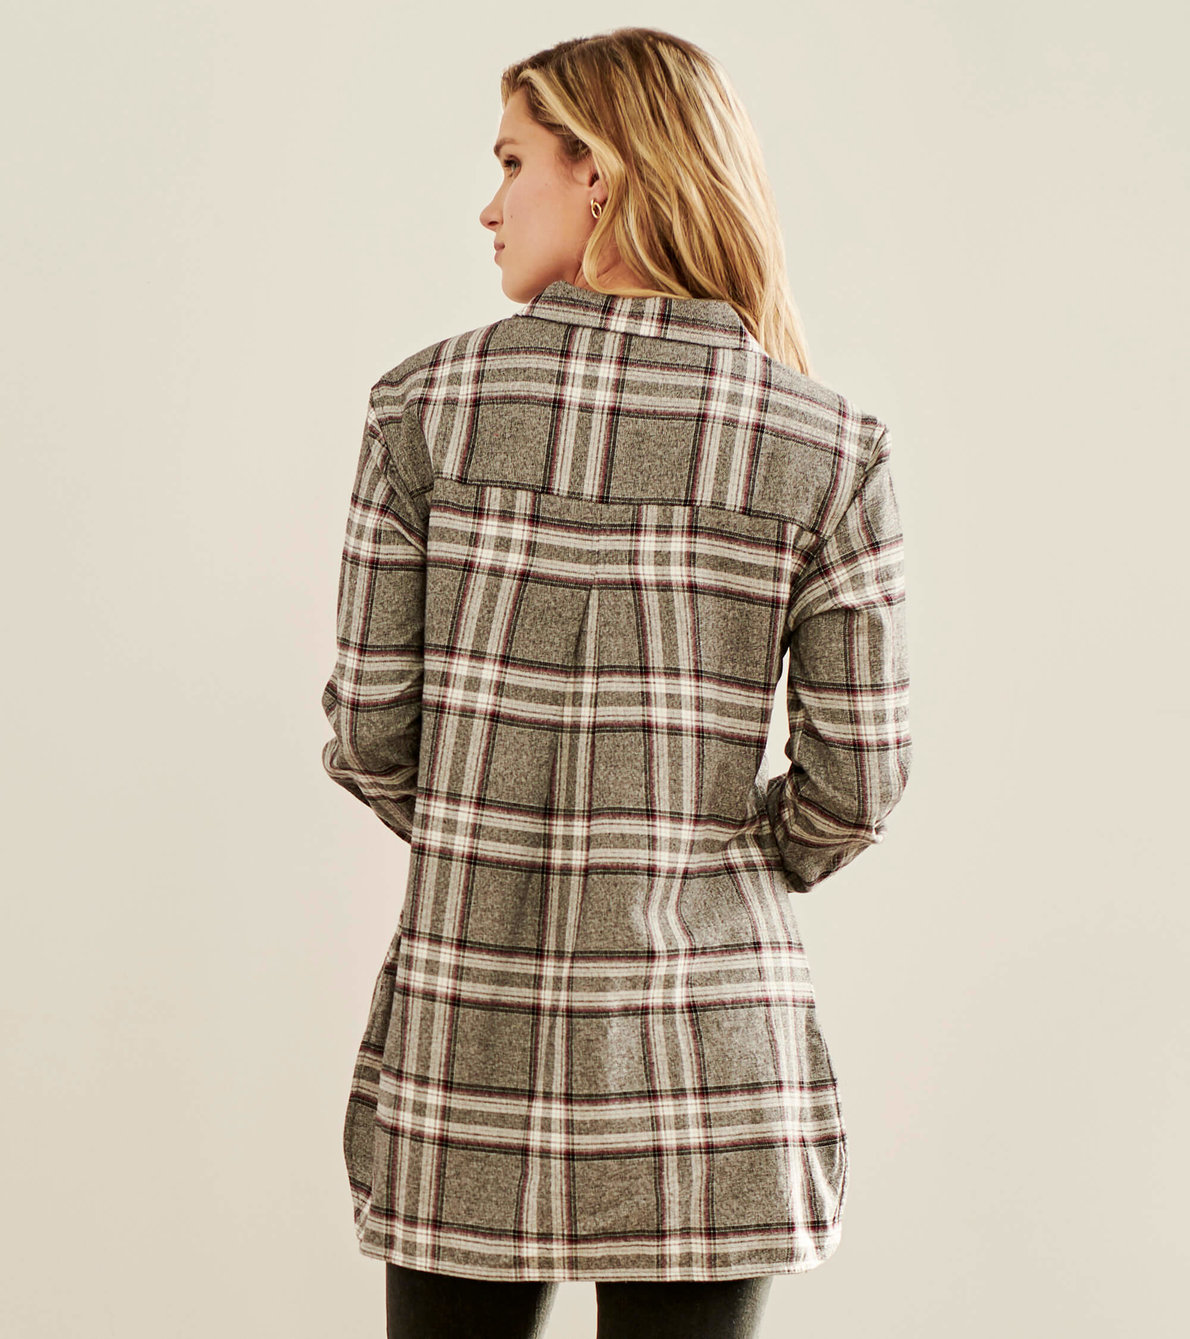 View larger image of Alison Tunic - Charcoal Plaid